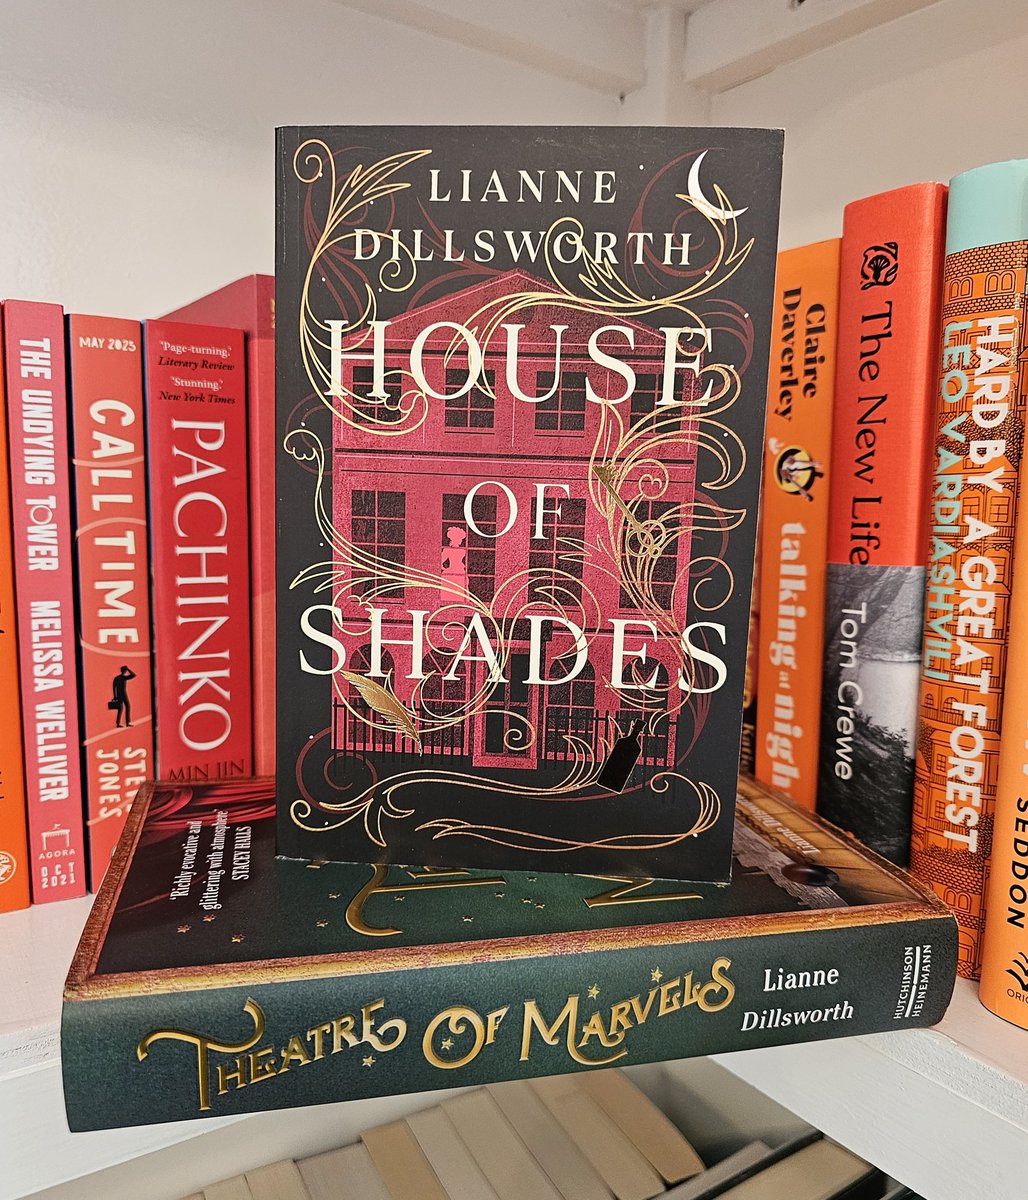 Happy Publication Day to #HouseofShades @LianneDWrites This is my next read and I can't wait! Thank you @HutchHeinemann @alicemaydewing for my lovely proof copy. #bookbloggers #bookX #booktwitter